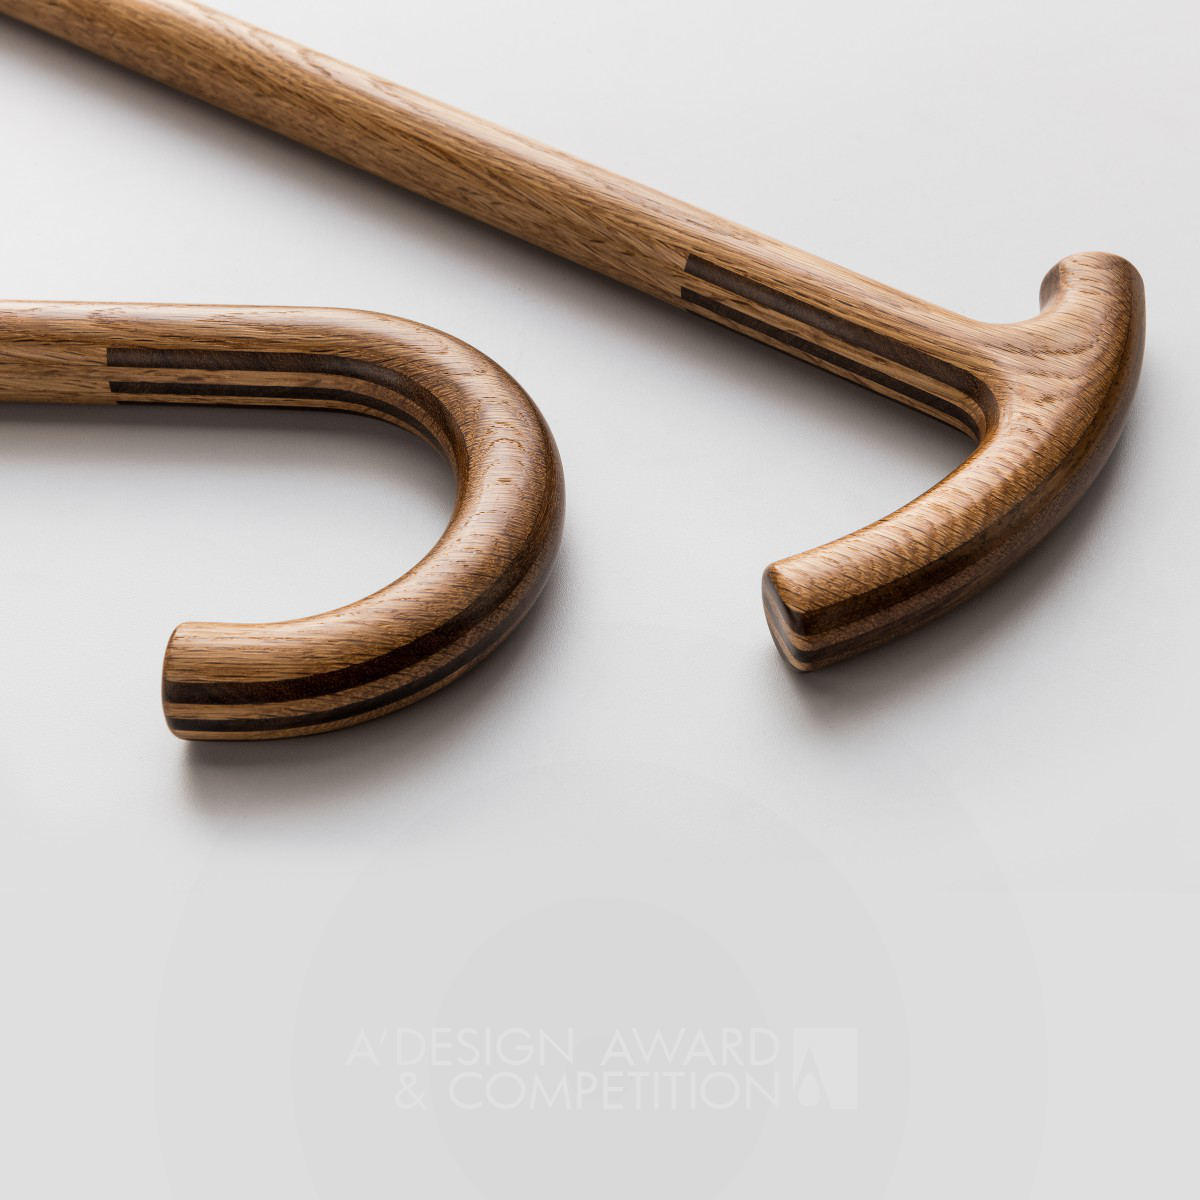 Álvaro Wolmer wins Silver at the prestigious A' Limited Edition and Custom Design Award with Bengalas Walking Sticks.